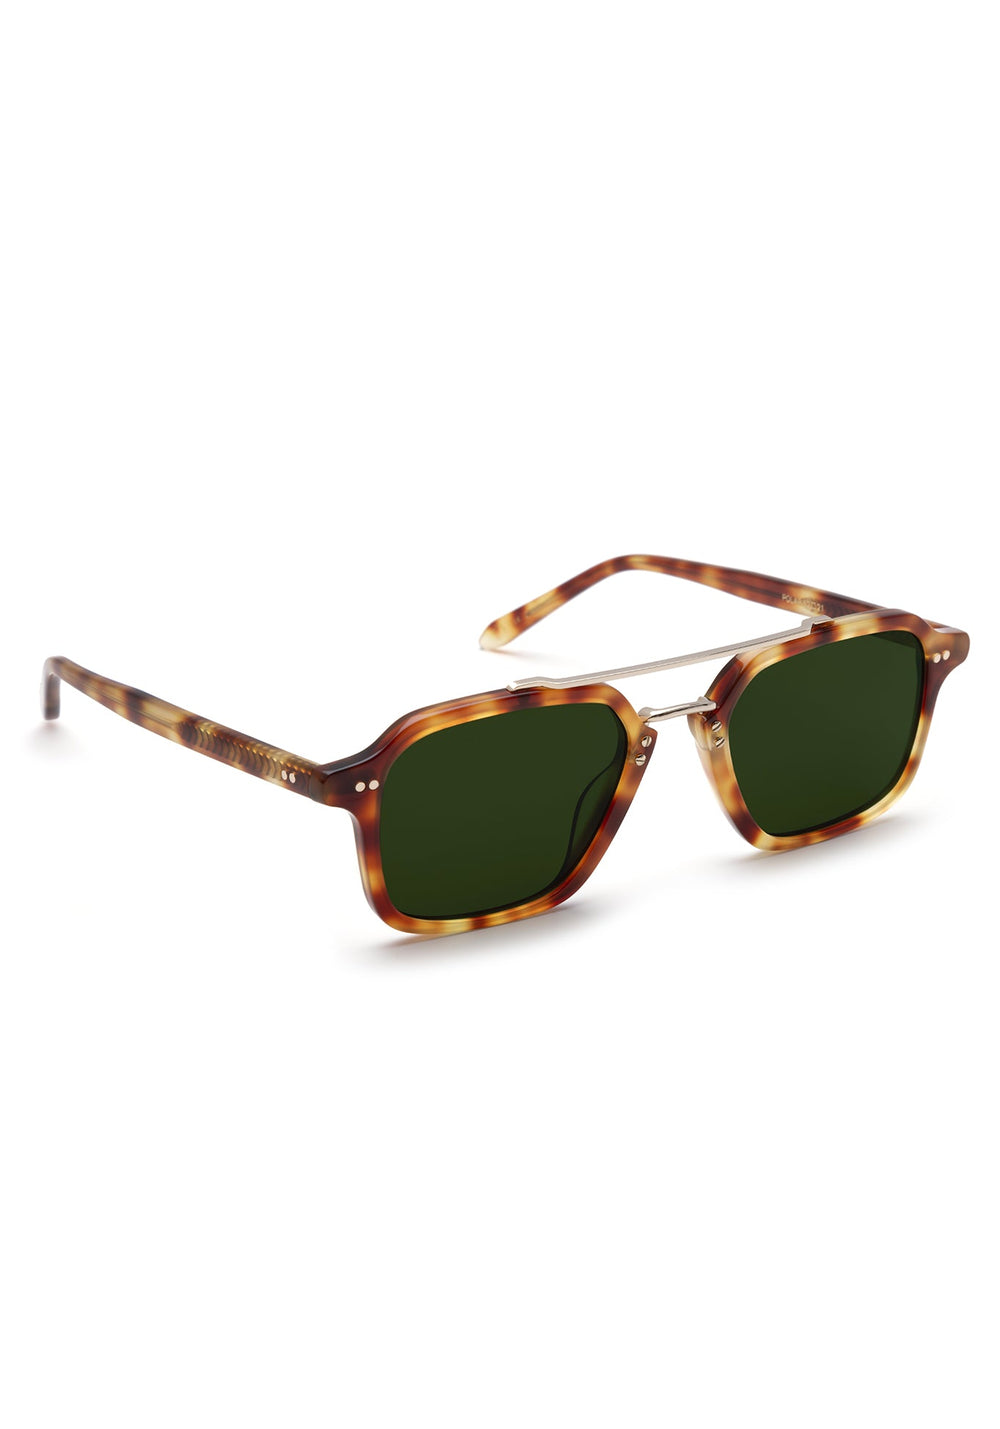 COLTON | Hawksbill 12K Polarized Handcrafted, luxury brown tortoise acetate and stainless steel square aviator polarized KREWE sunglasses